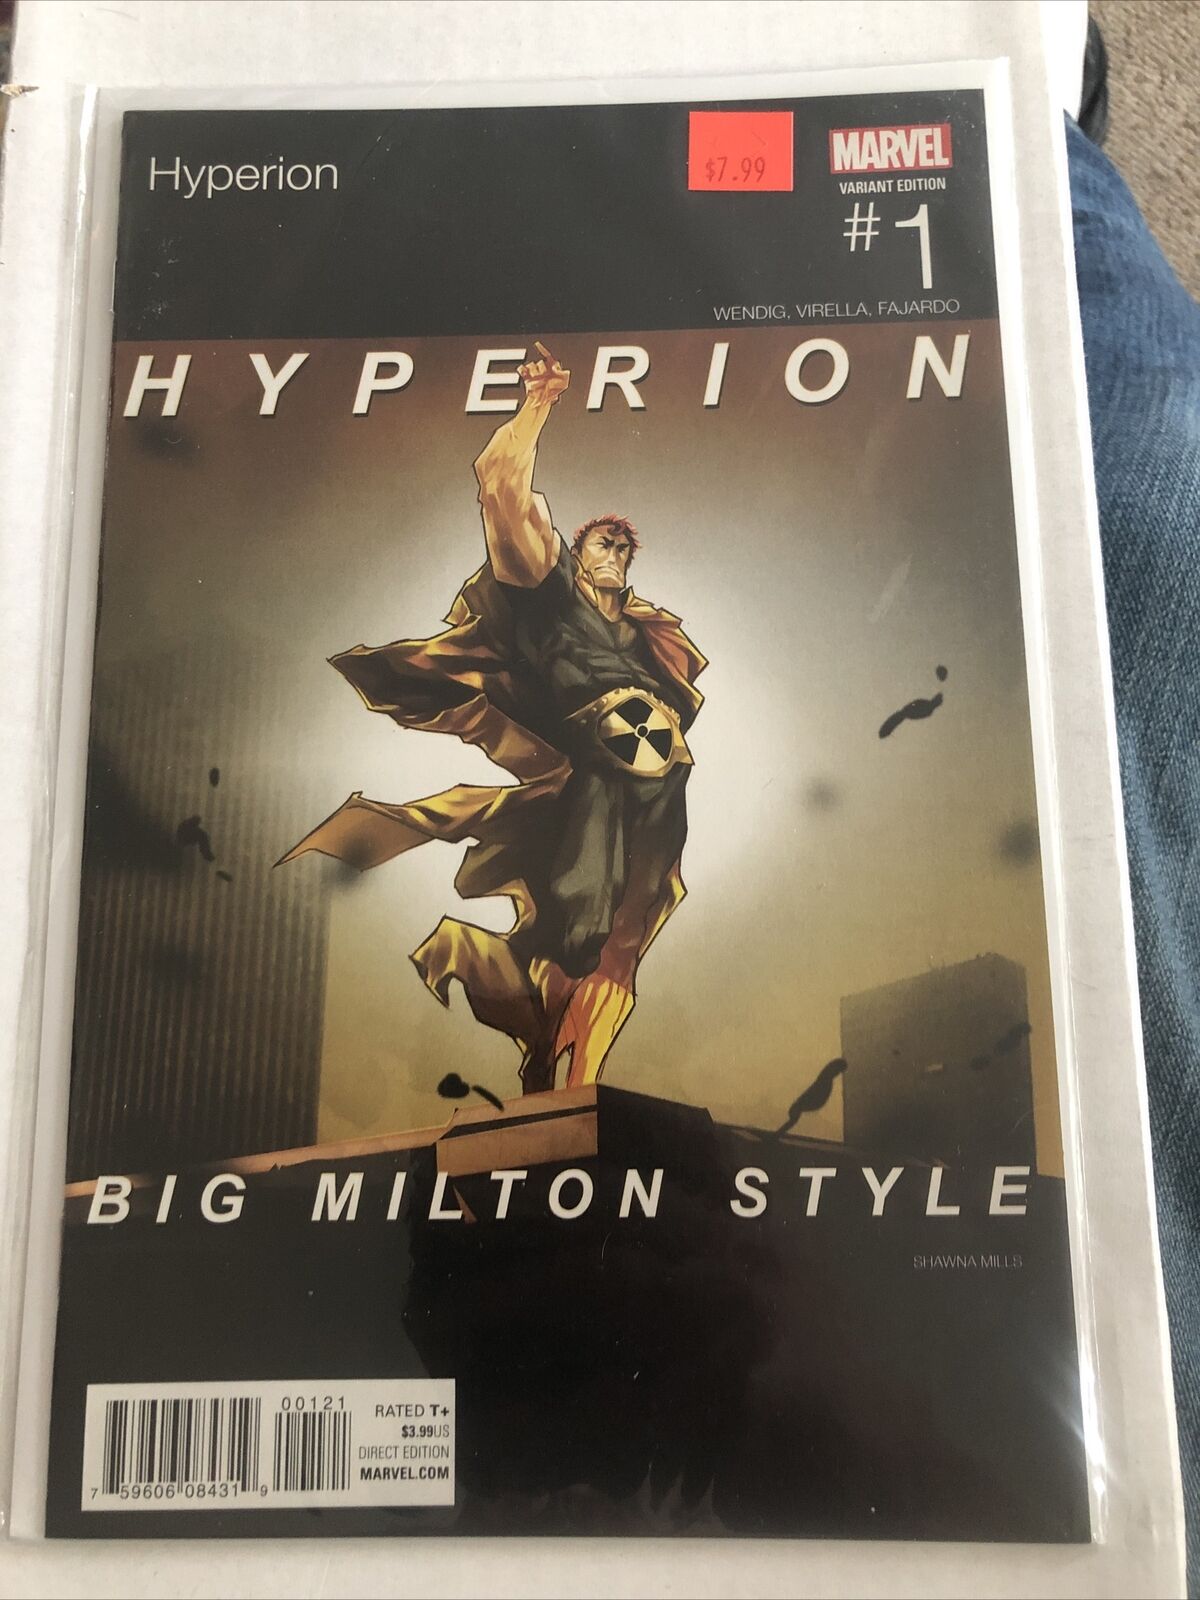 Hyperion #1 3 Issue Lot Including Hip Hop Variant